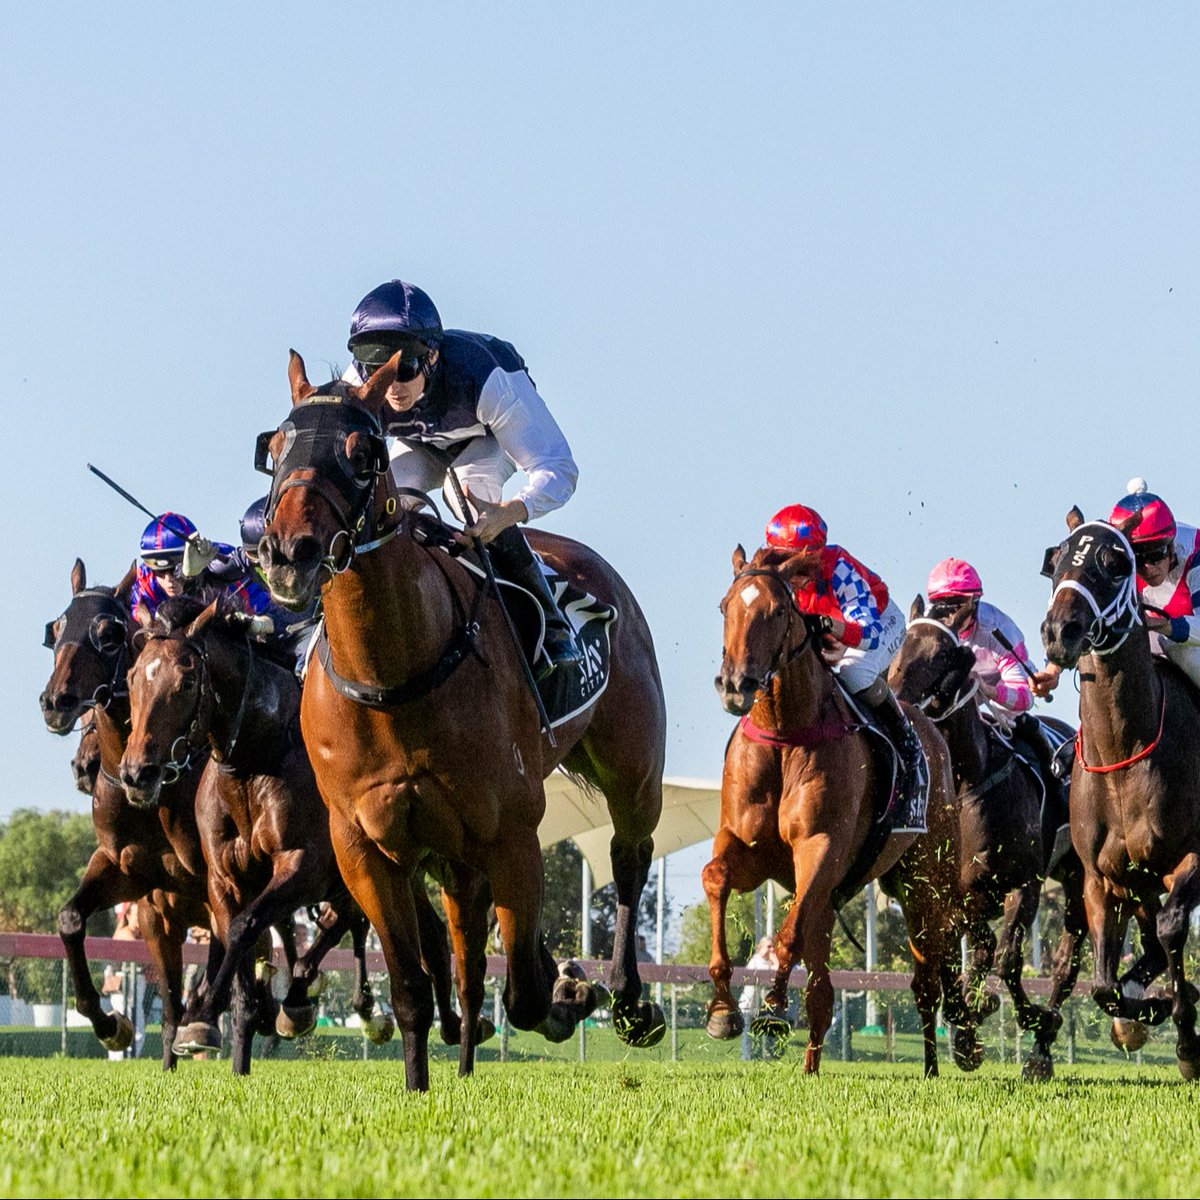 Officially rated as a Good 4, the track is ready to go and so are we. Bring on Auraria Stakes Day 🤝 TRACK REPORT & SPEED MAPS | bit.ly/4cRo1mB